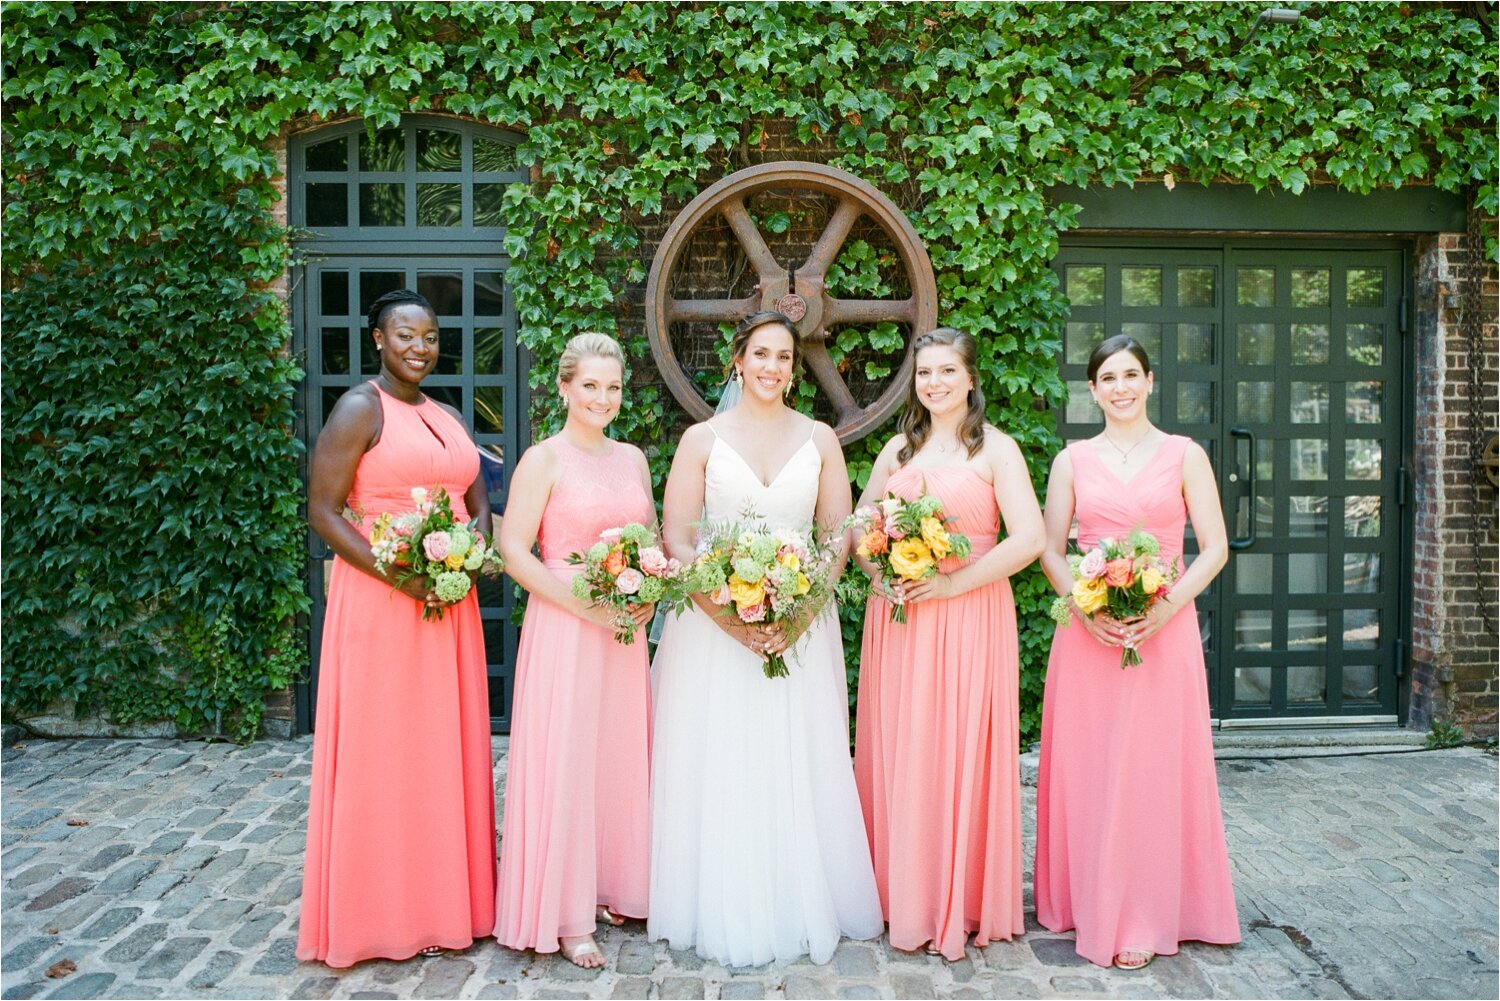 Coral Bridesmaids Dresses with Bright Wedding Bouquets